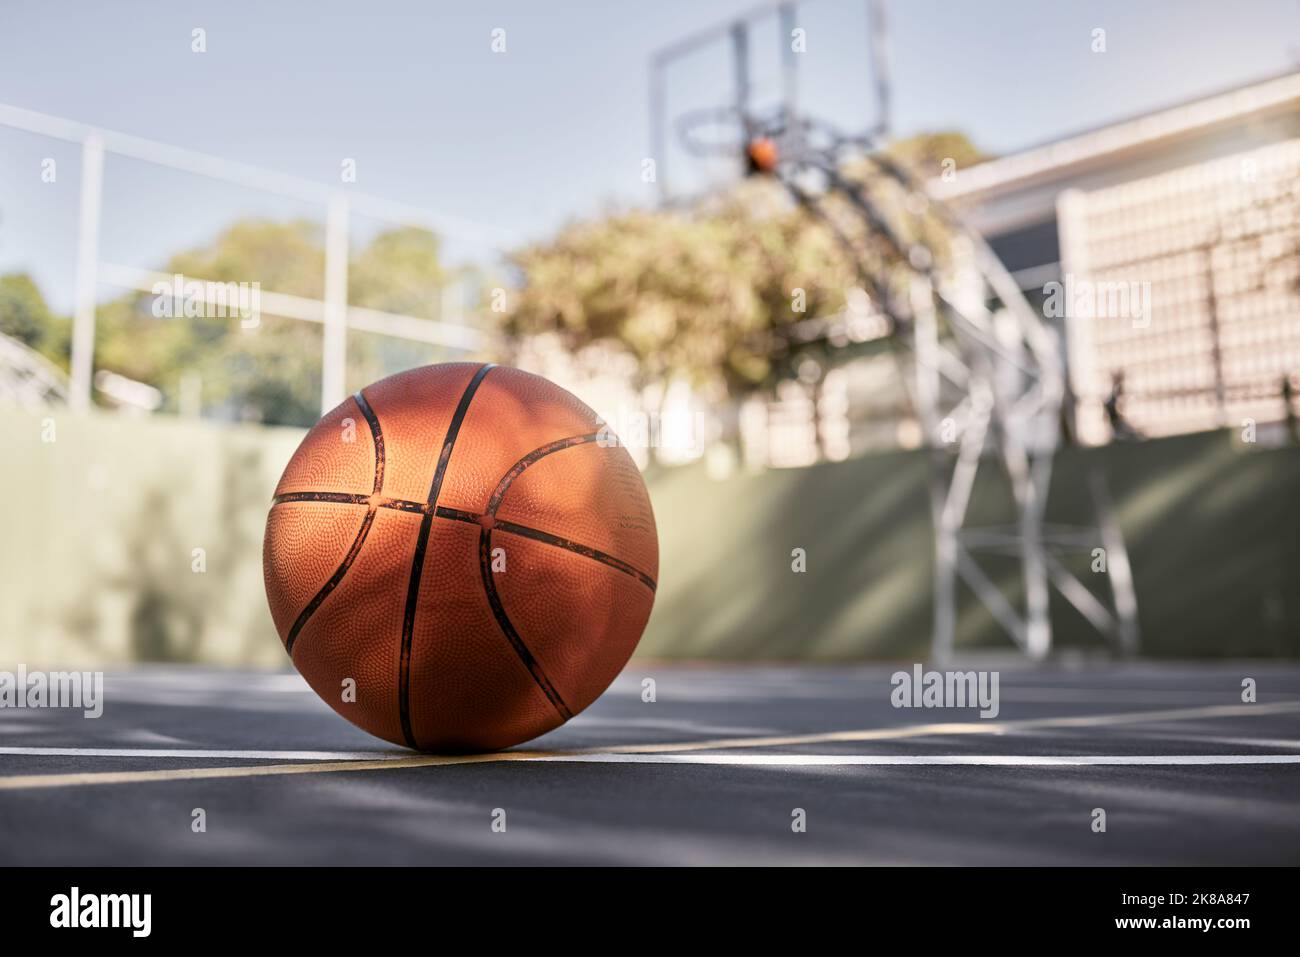 Basketball court, ball and sports match or competition game for fitness, exercise and training in New York. Ball sports, floor and urban community Stock Photo